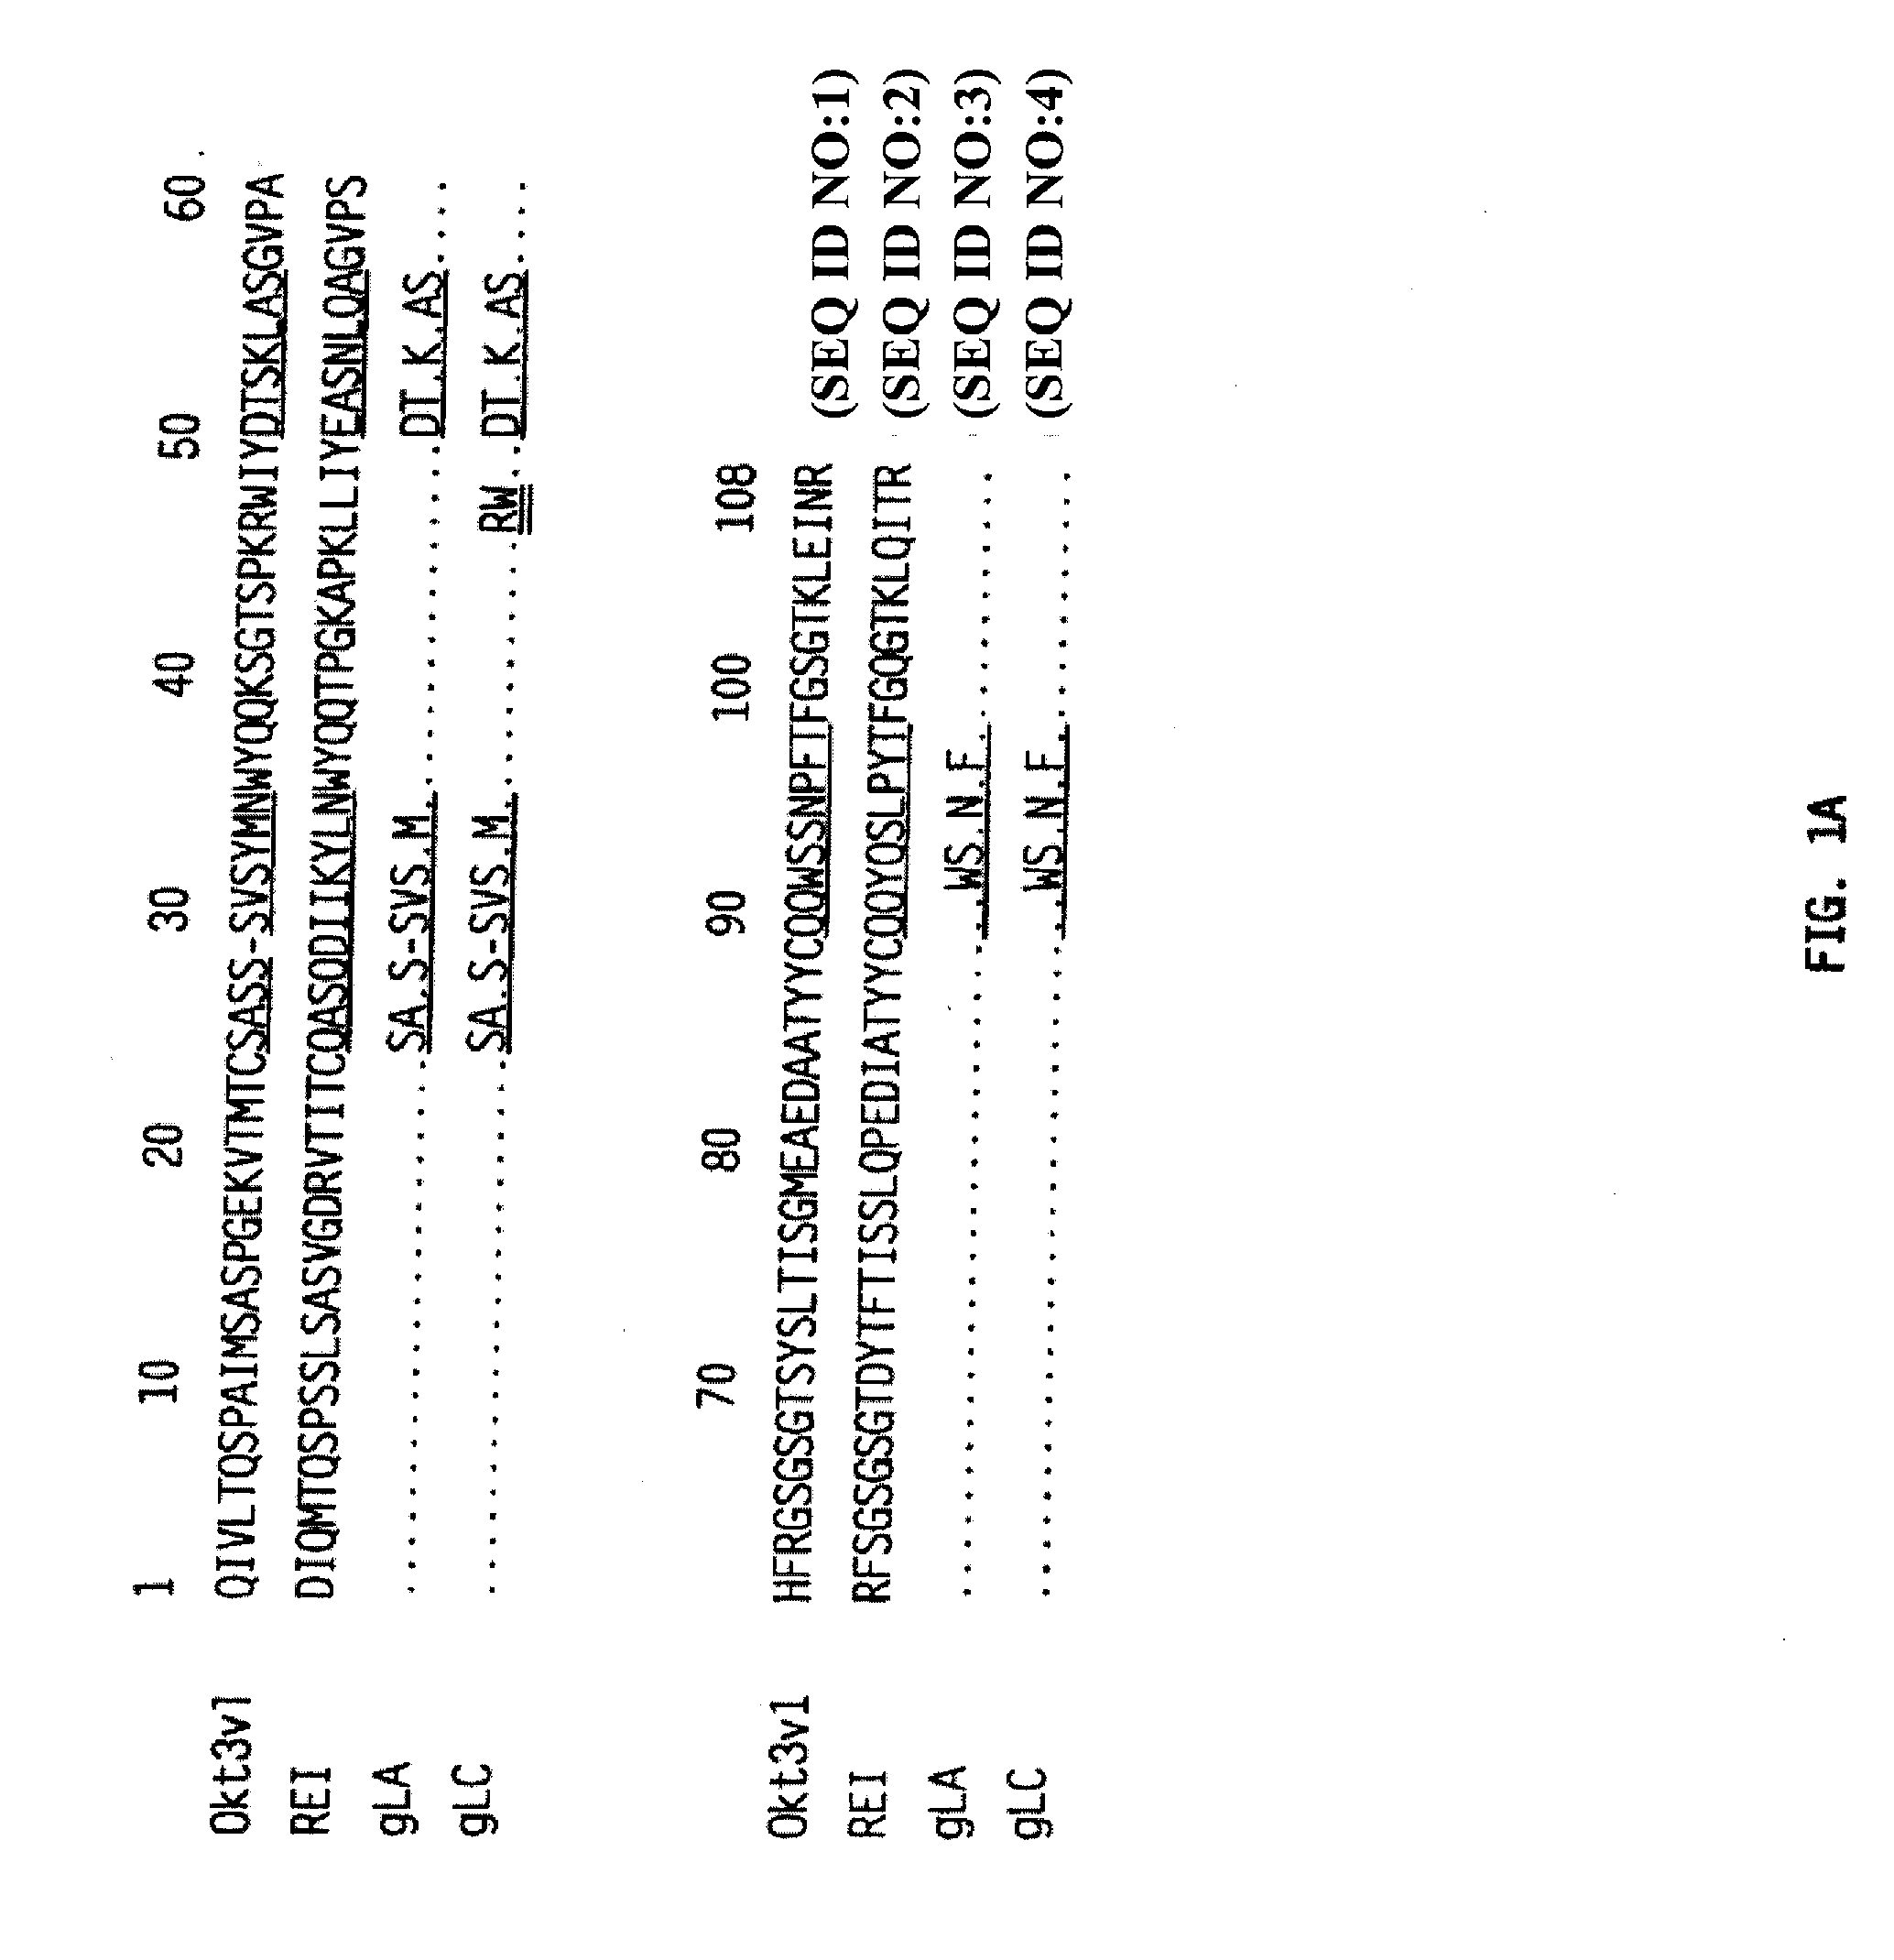 Methods for the Treatment of Autoimmune Disorders Using Immunosuppressive Monoclonal Antibodies with Reduced Toxicity